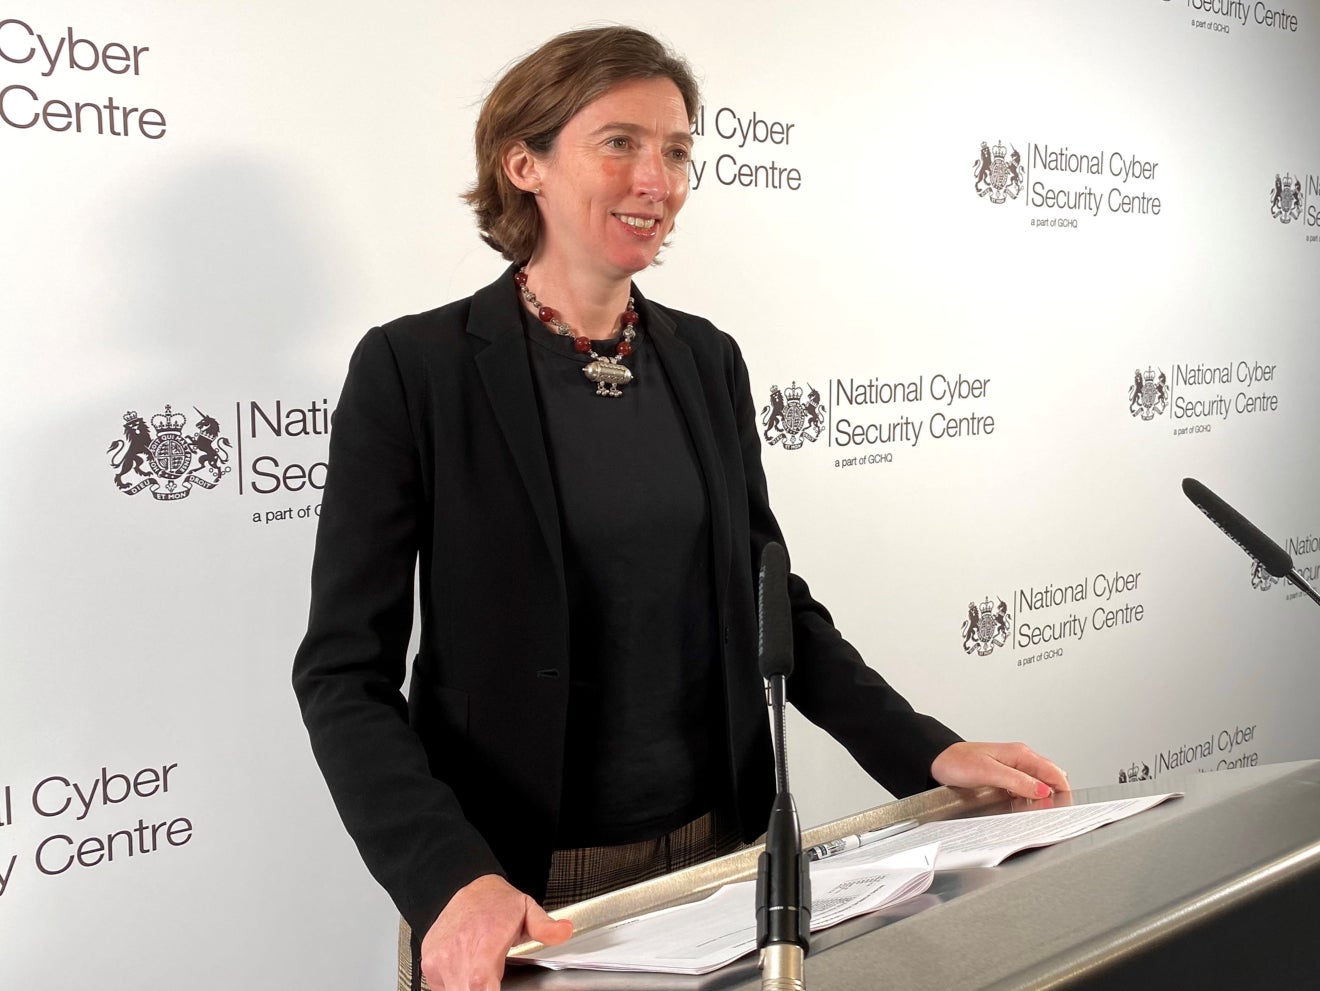 NCSC chief executive Lindy Cameron speaking at a conference held at Chatham House, London, on Monday